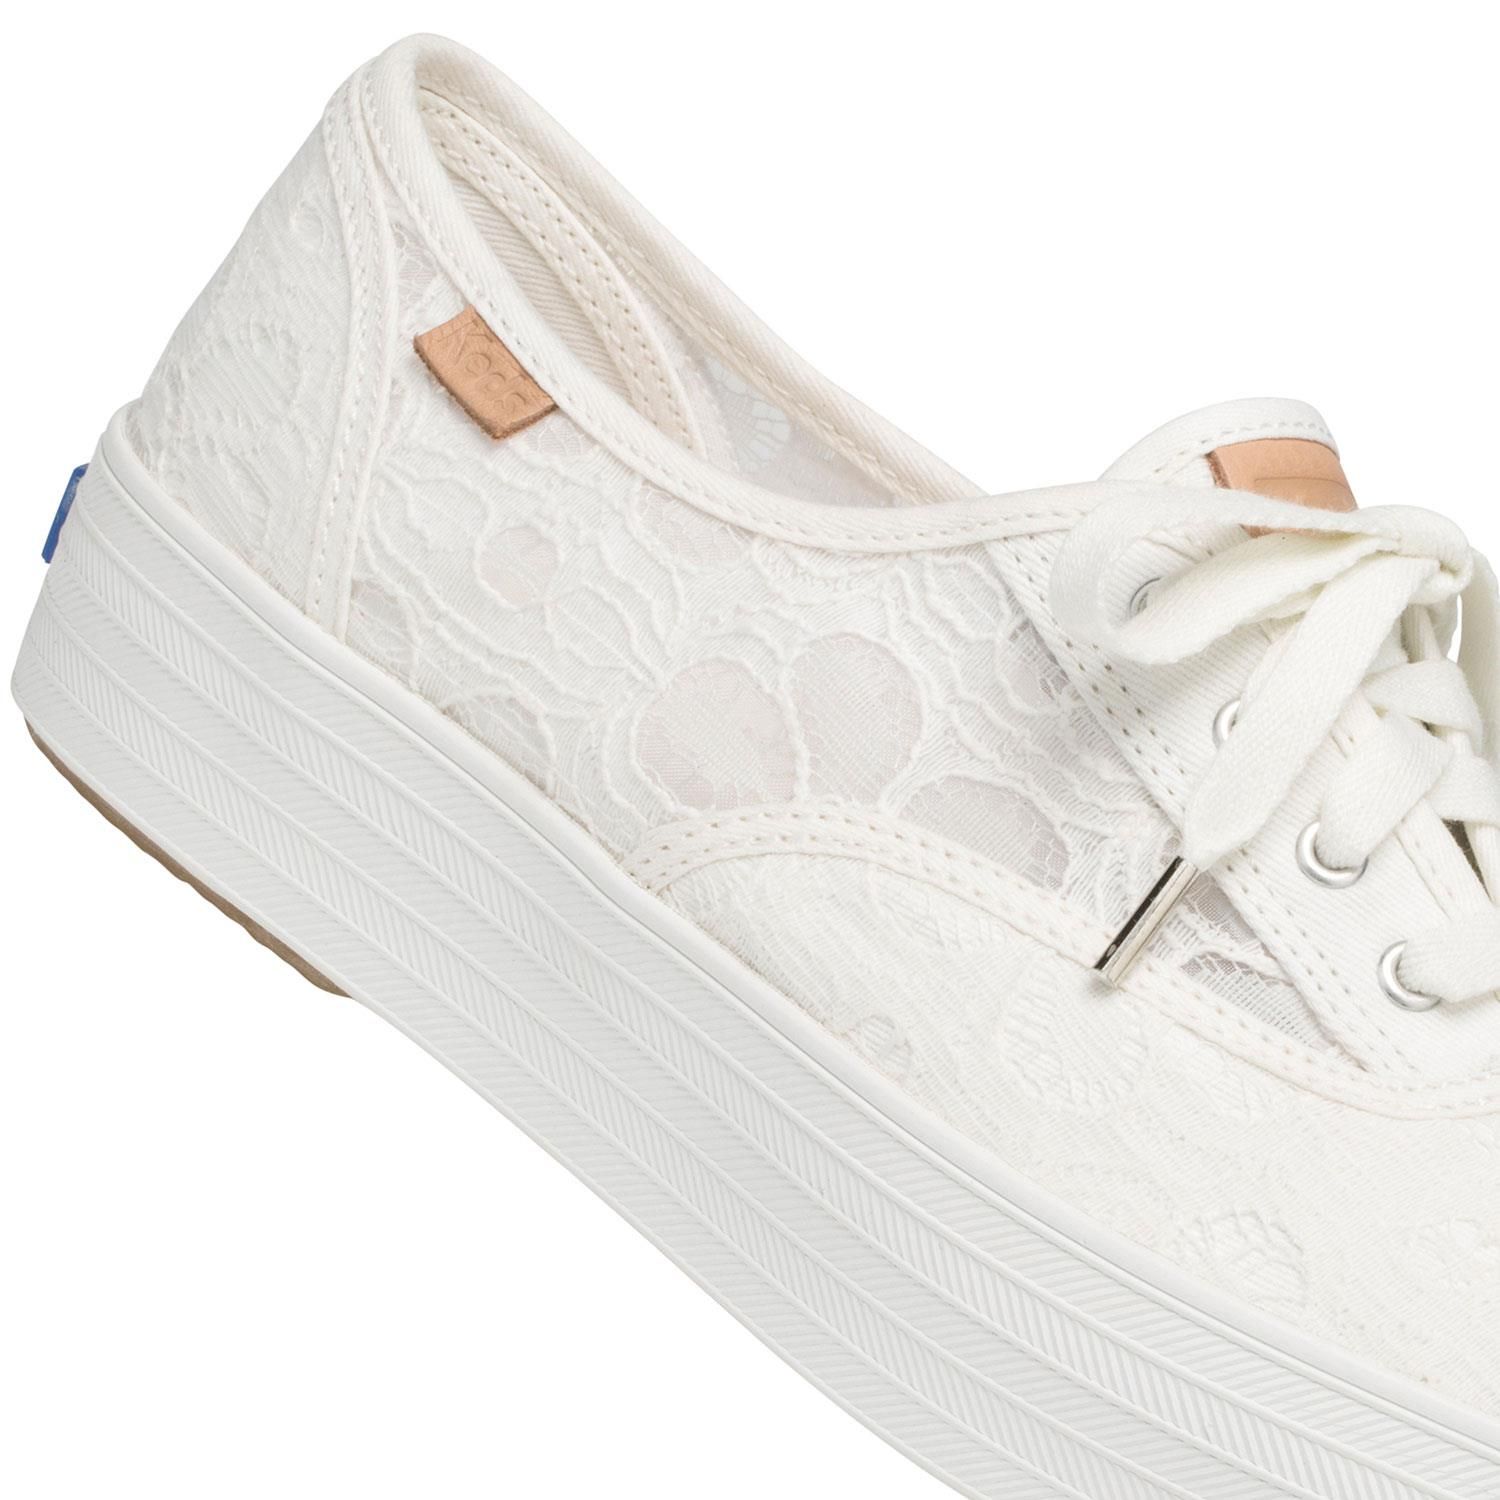 Keds Women's Triple CVO Festival Floral Sneaker with Rubber Outsole

Festival shoes: found. our triple platform sneakers in dainty eyelet are just the thing to add interest (and inches) to all your Coachella-inspired looks - denim cutoffs, crochet wraps, floral kimonos, flower crowns, etc.

Features: 
Textile upper
1